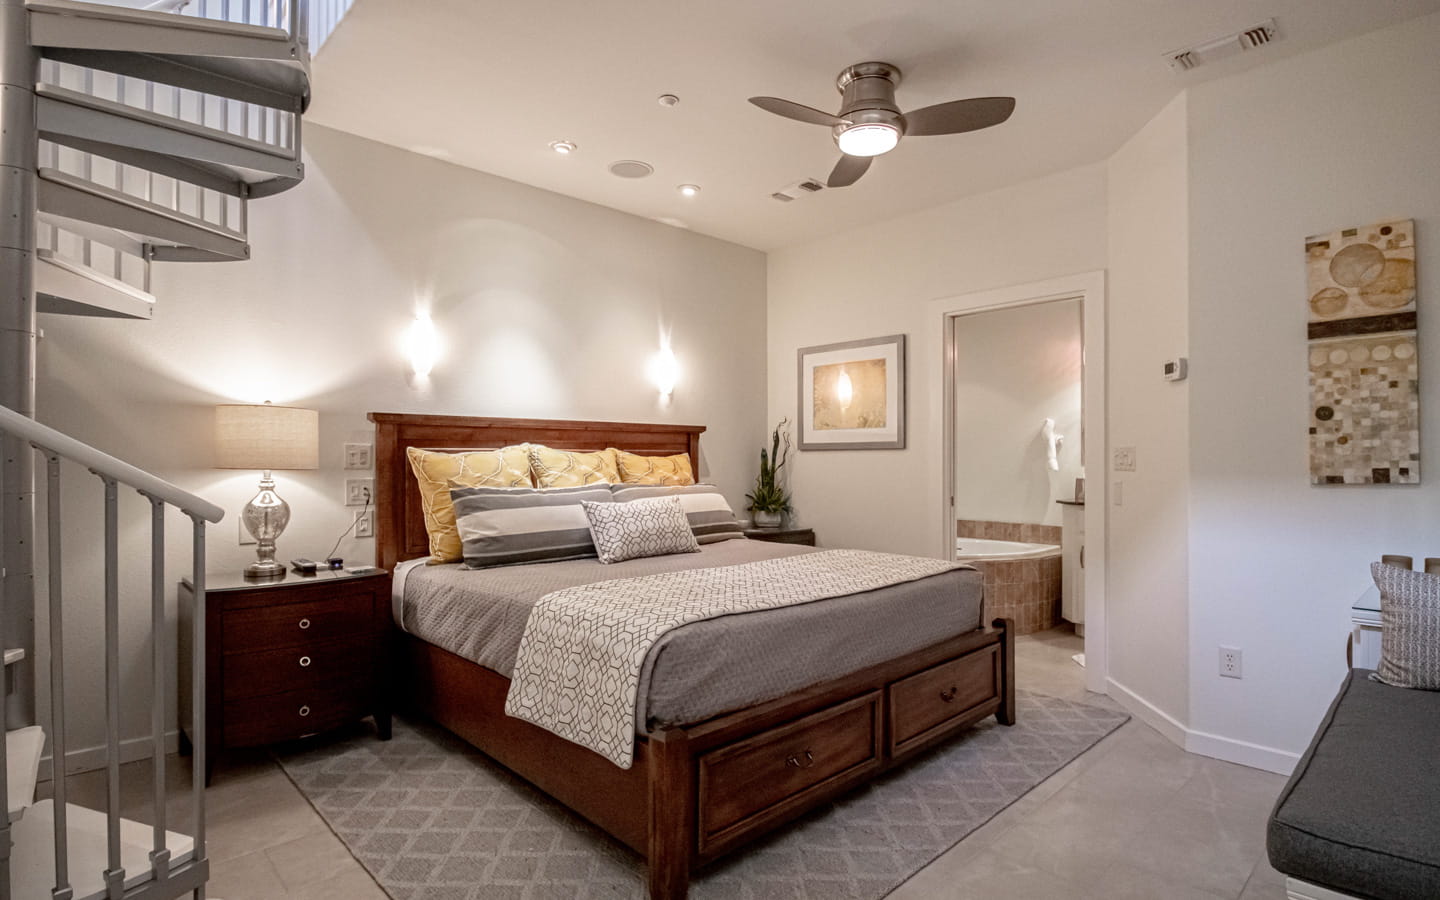 Queen storage bed with two end tables, a ceiling fan, and metal spiral staircase